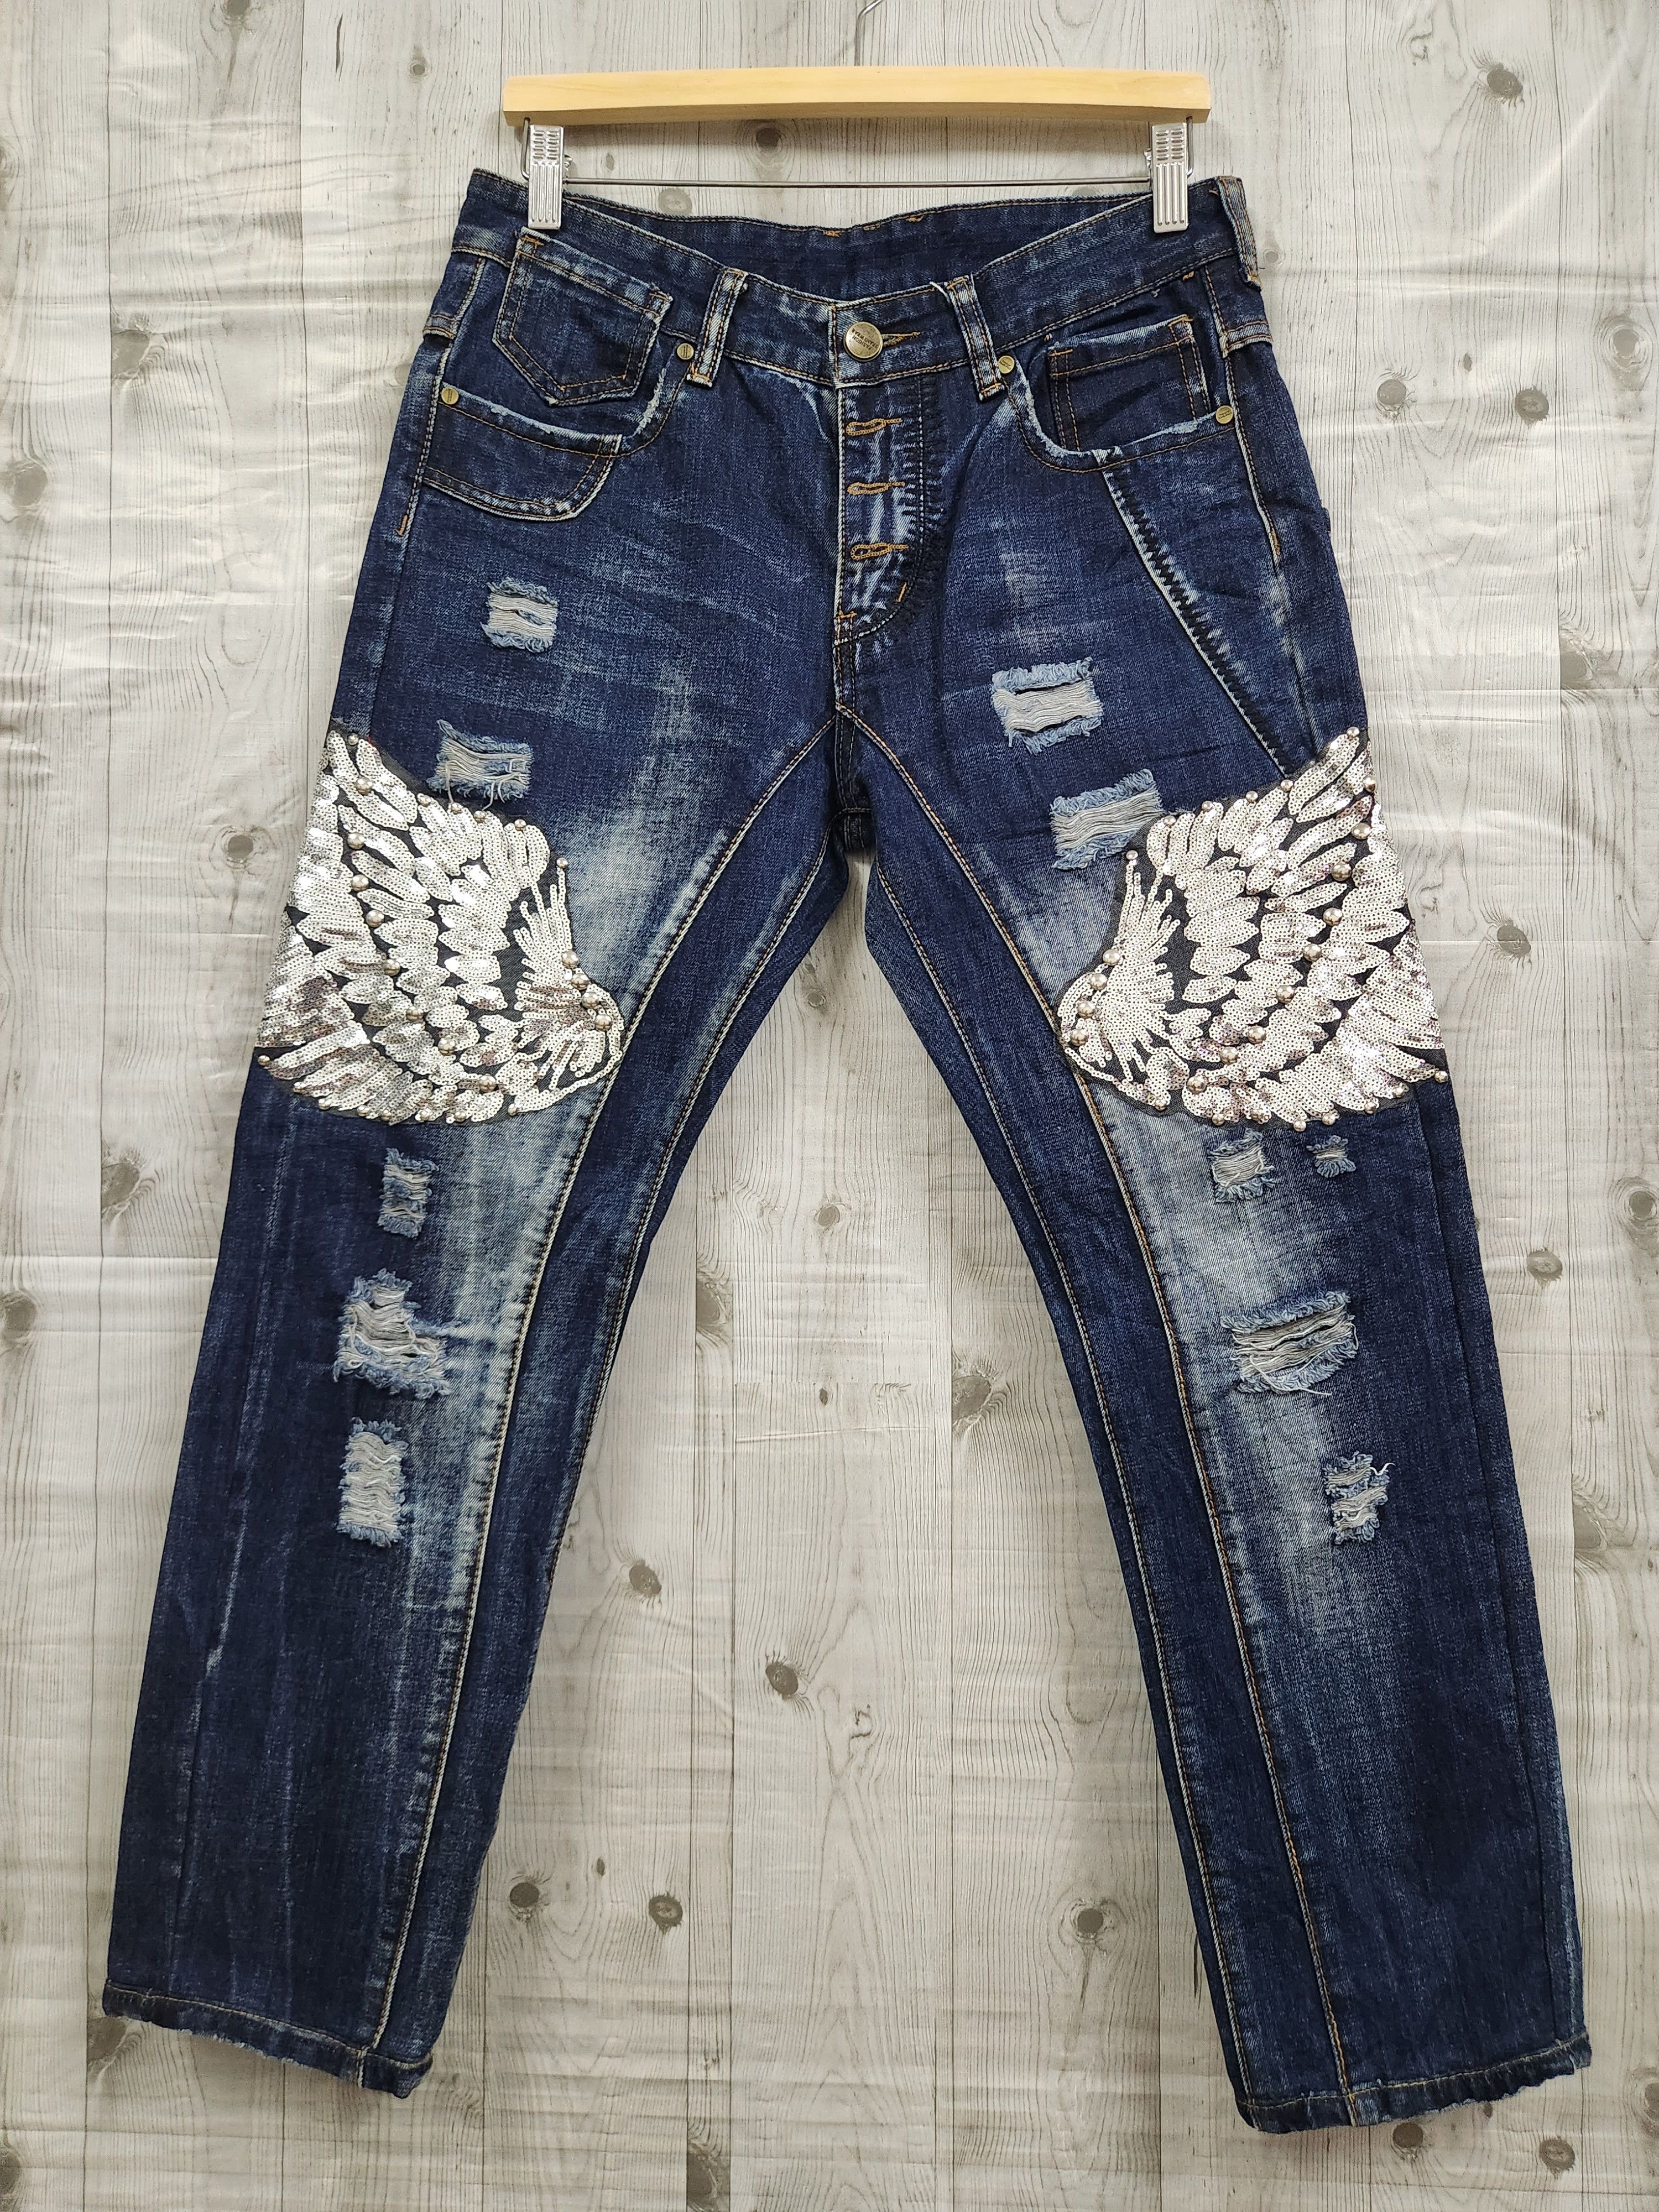 Japanese Brand - Japan Tokyo Denim Double Wings Patches - 1